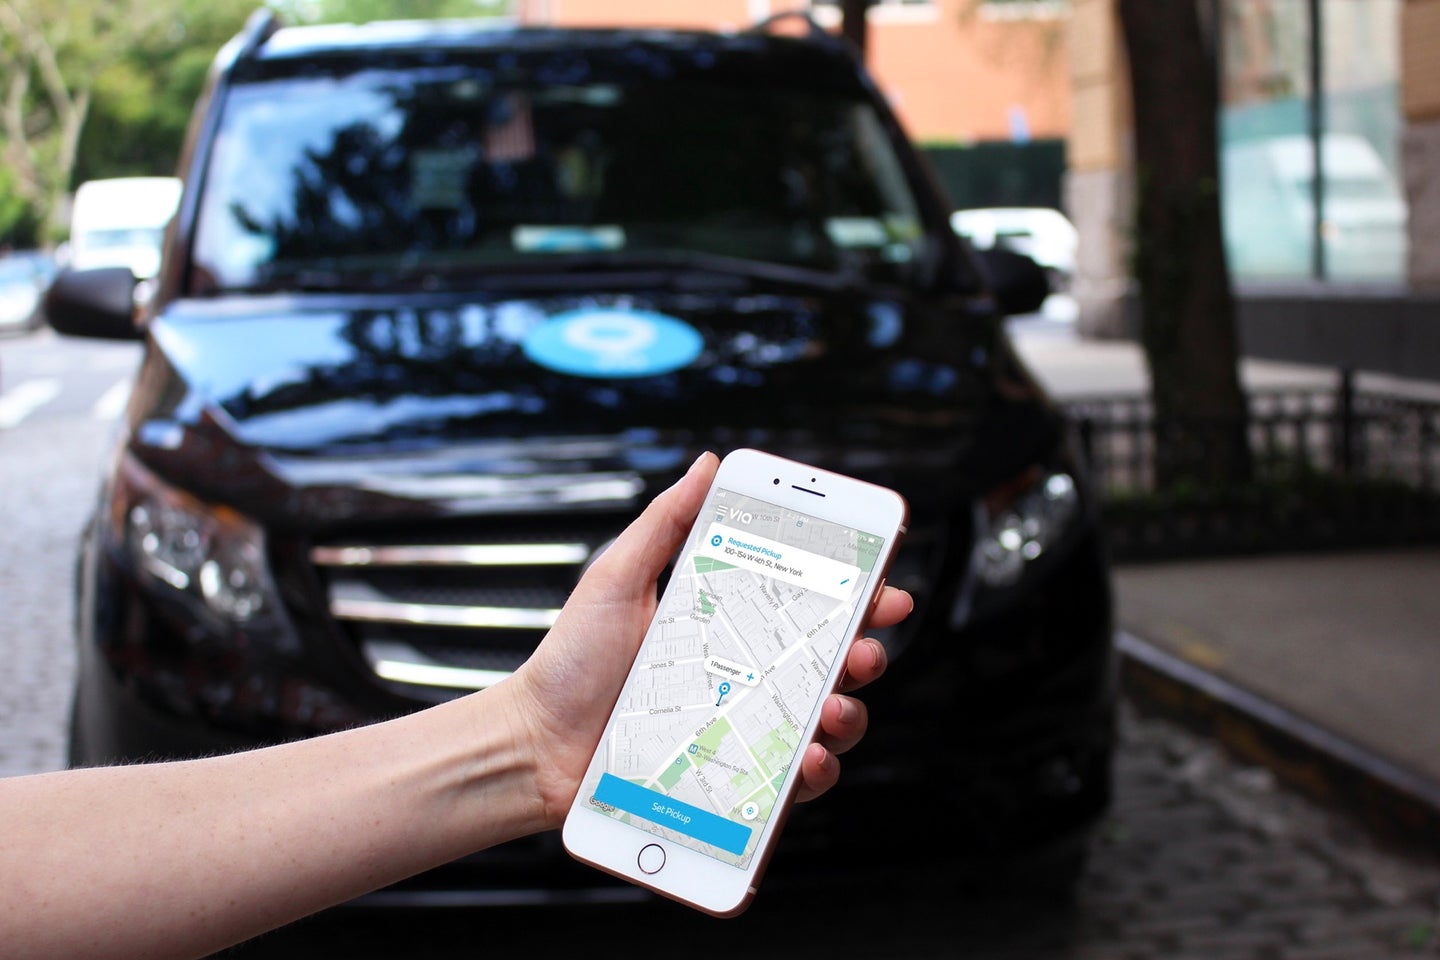 This Ride-Sharing Company Will Ditch Private Rides on Earth Day to Reduce Emissions